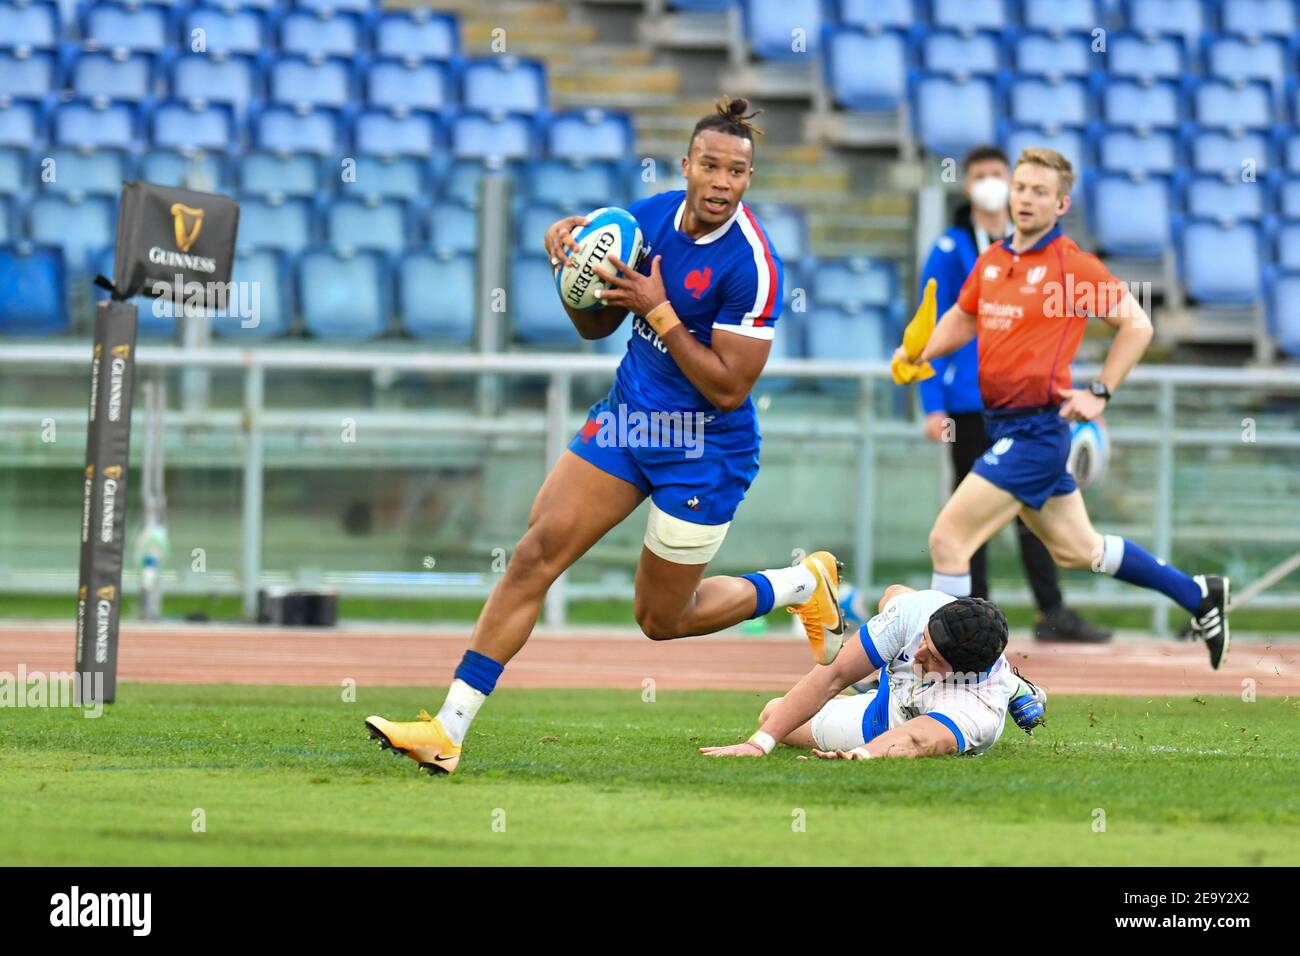 Rome, Italy. 6th Feb, 2021. Rome, Italy, Stadio Olimpico, February 06, 2021, Teddy Thomas (France) carries the ball during Italy vs France - Rugby Six Nations match Credit: Carlo Cappuccitti/LPS/ZUMA Wire/Alamy Live News Stock Photo